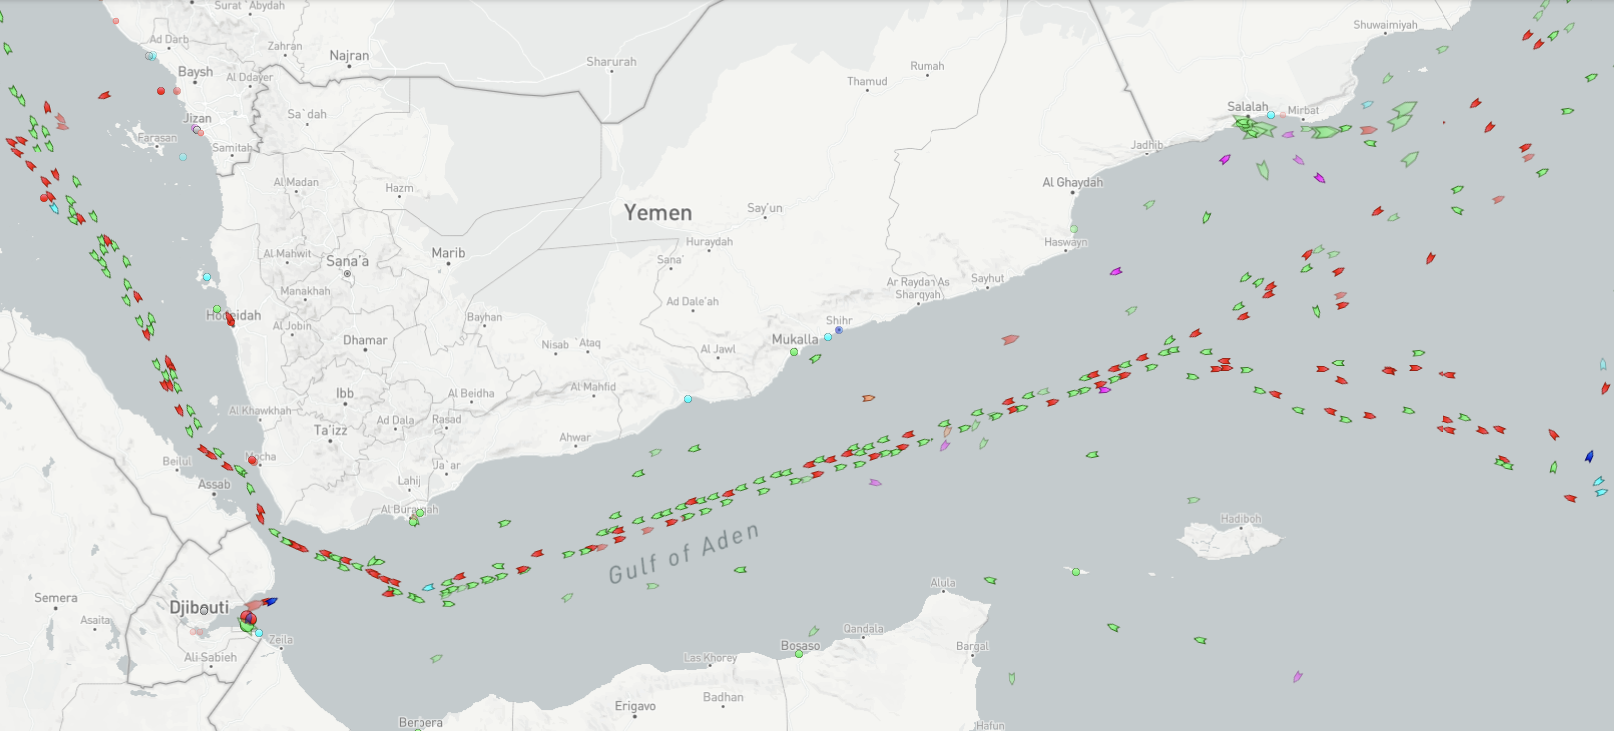 Ships in the Gulf of Aden